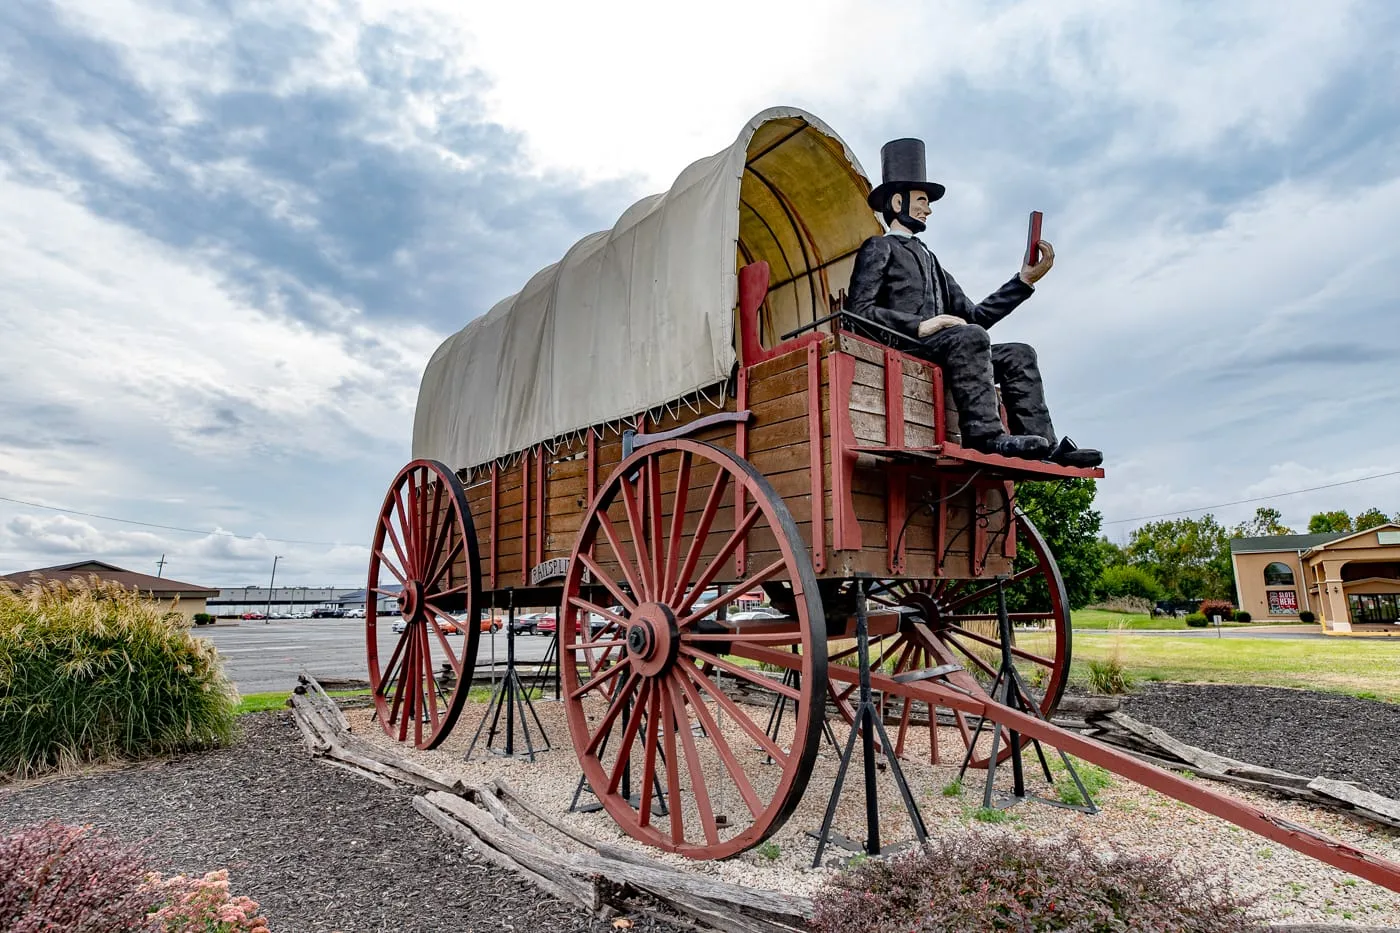 Giant Abraham Lincoln statue on the World's Largest Covered Wagon in Lincoln, Illinois Route 66 roadside attraction - Best Illinois Roadside Attractions